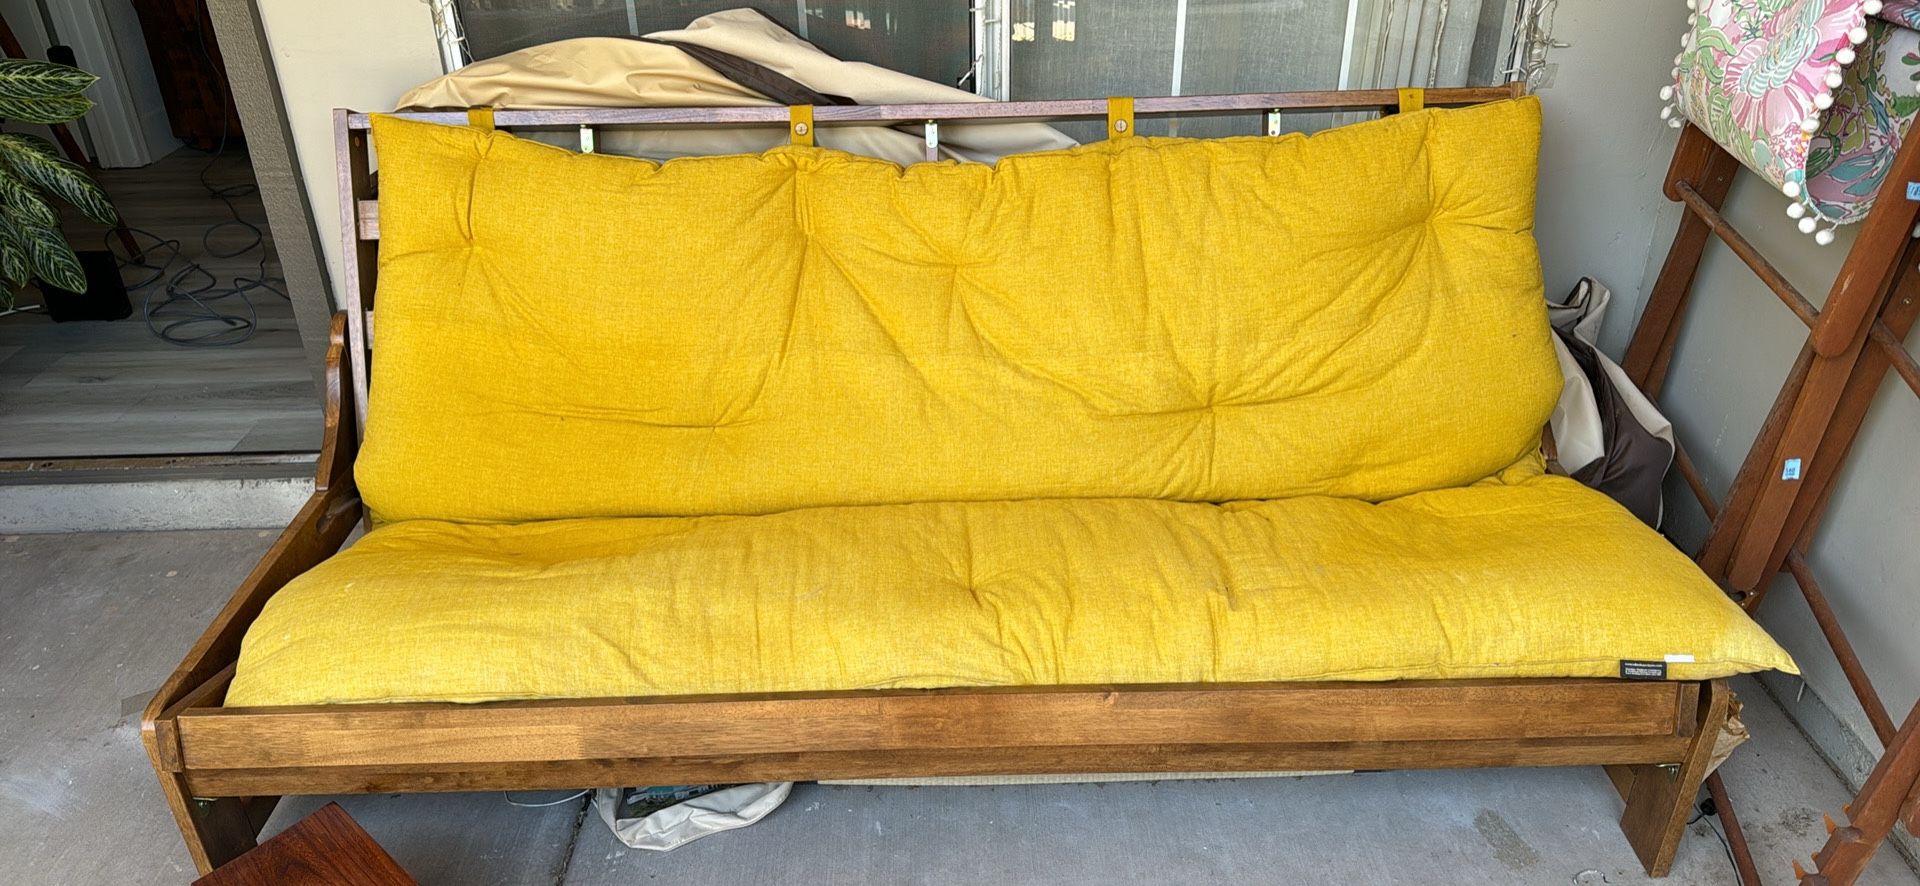 Futon Sofa Bed With Authentic Japanese Mattress. Co